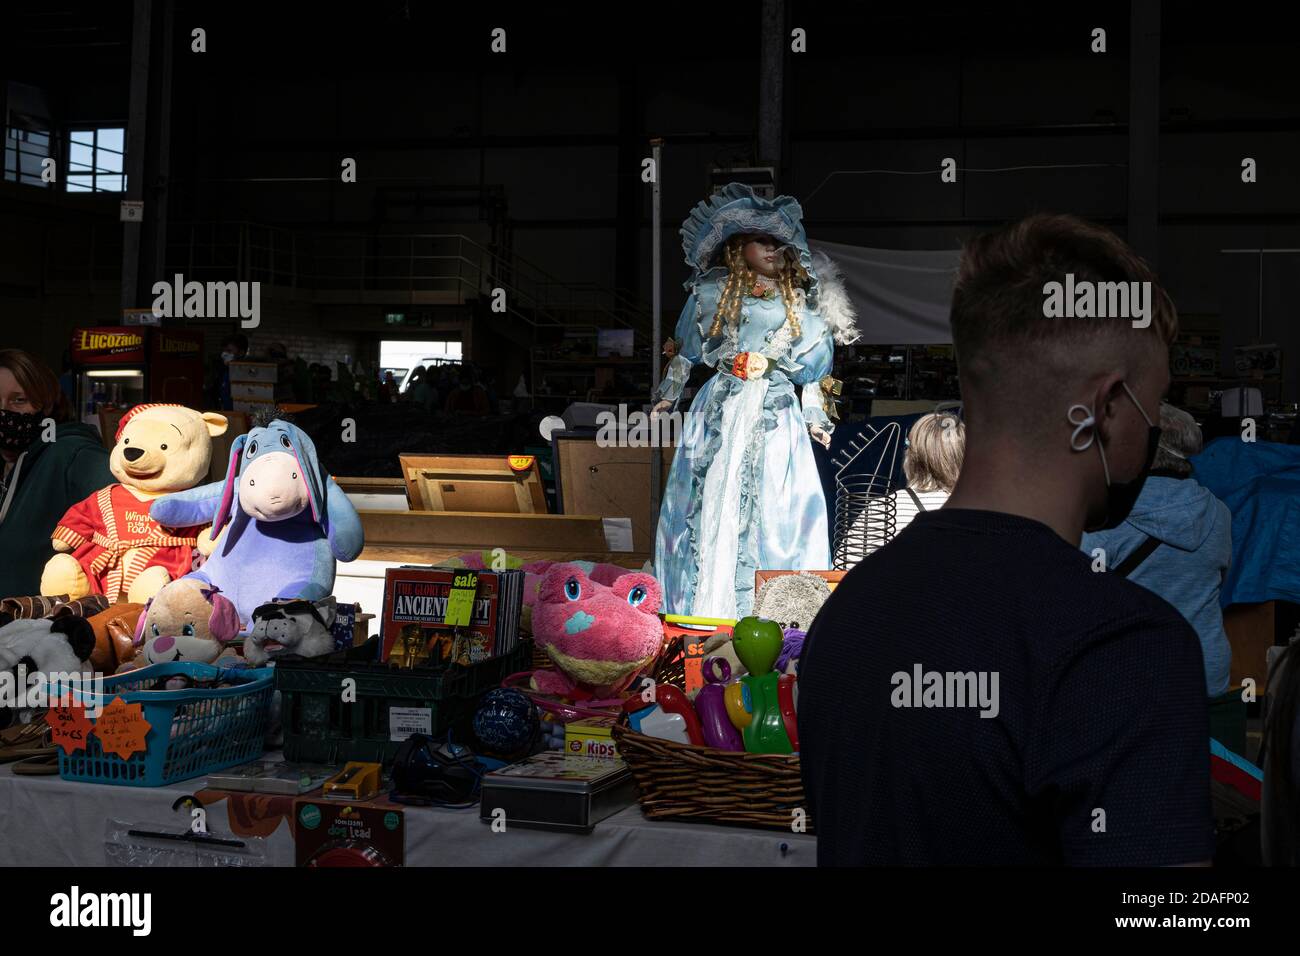 Light and shade on dolls, cuddley toys, winnie the pooh, at Car boot sale, bric a brac, for sale at a weekly market at Castleinch, County Kilkenny, Ir Stock Photo